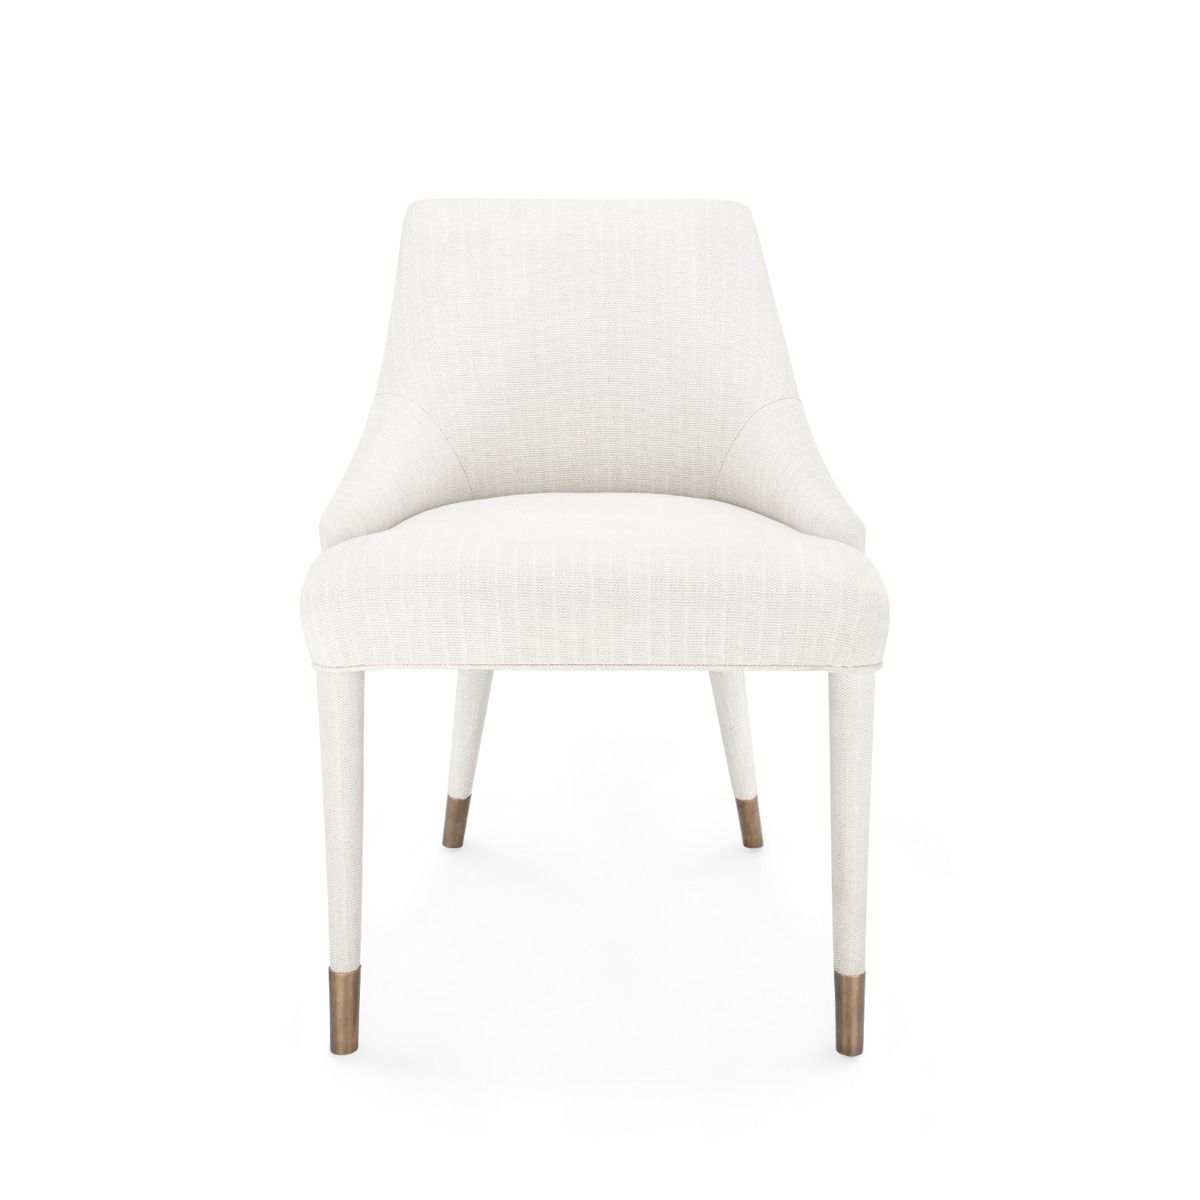 Odette Armchair, Natural Dining Chair Bungalow 5     Four Hands, Burke Decor, Mid Century Modern Furniture, Old Bones Furniture Company, Old Bones Co, Modern Mid Century, Designer Furniture, https://www.oldbonesco.com/